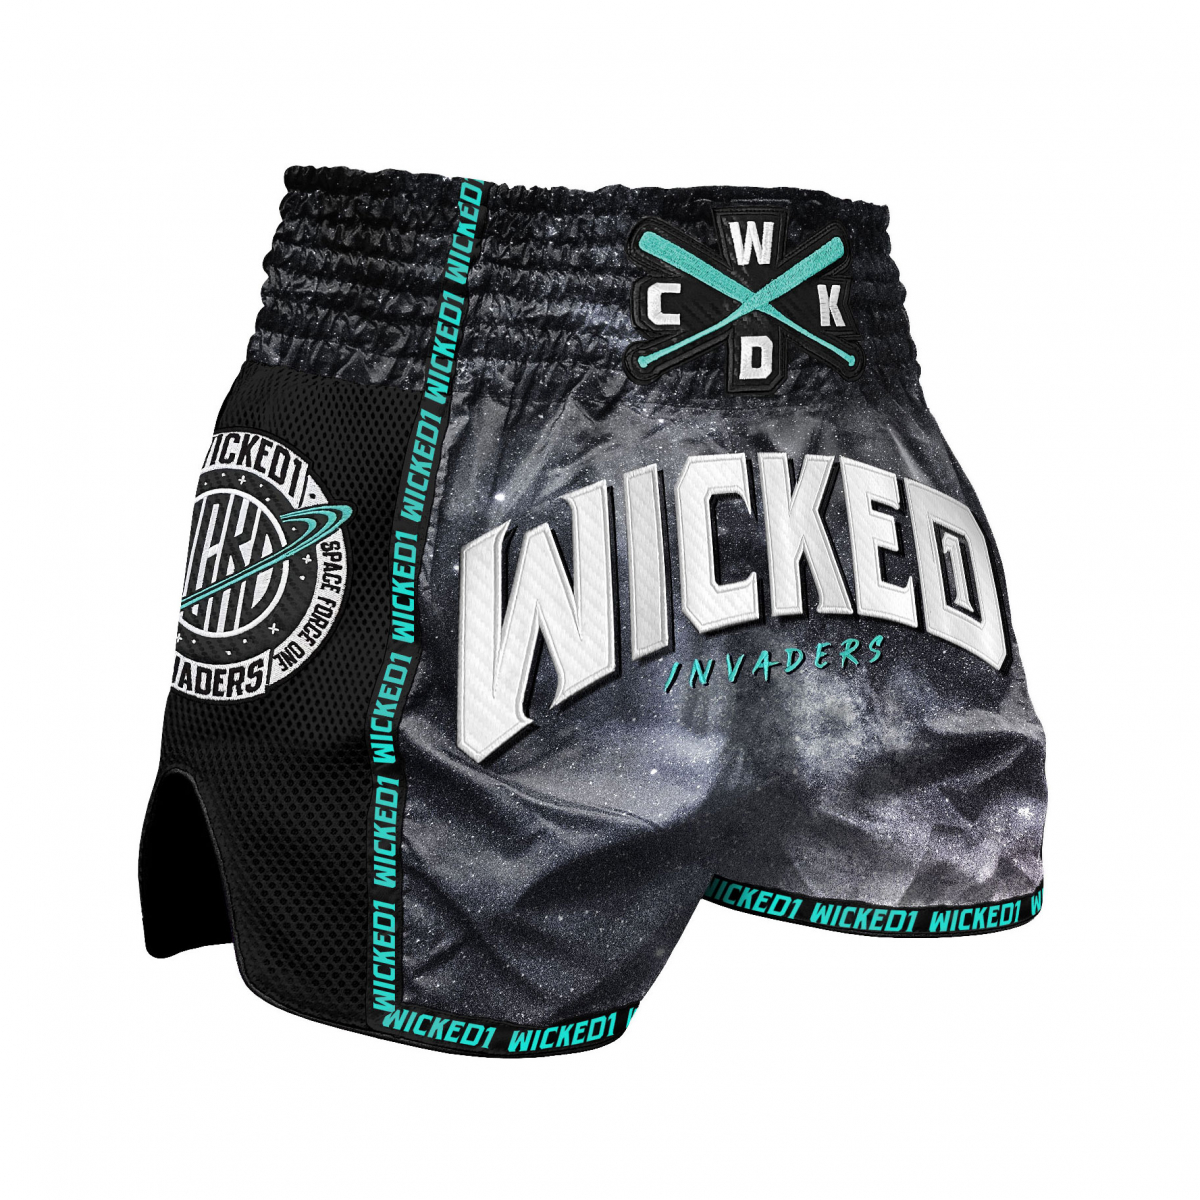 Short Wicked One Invaders